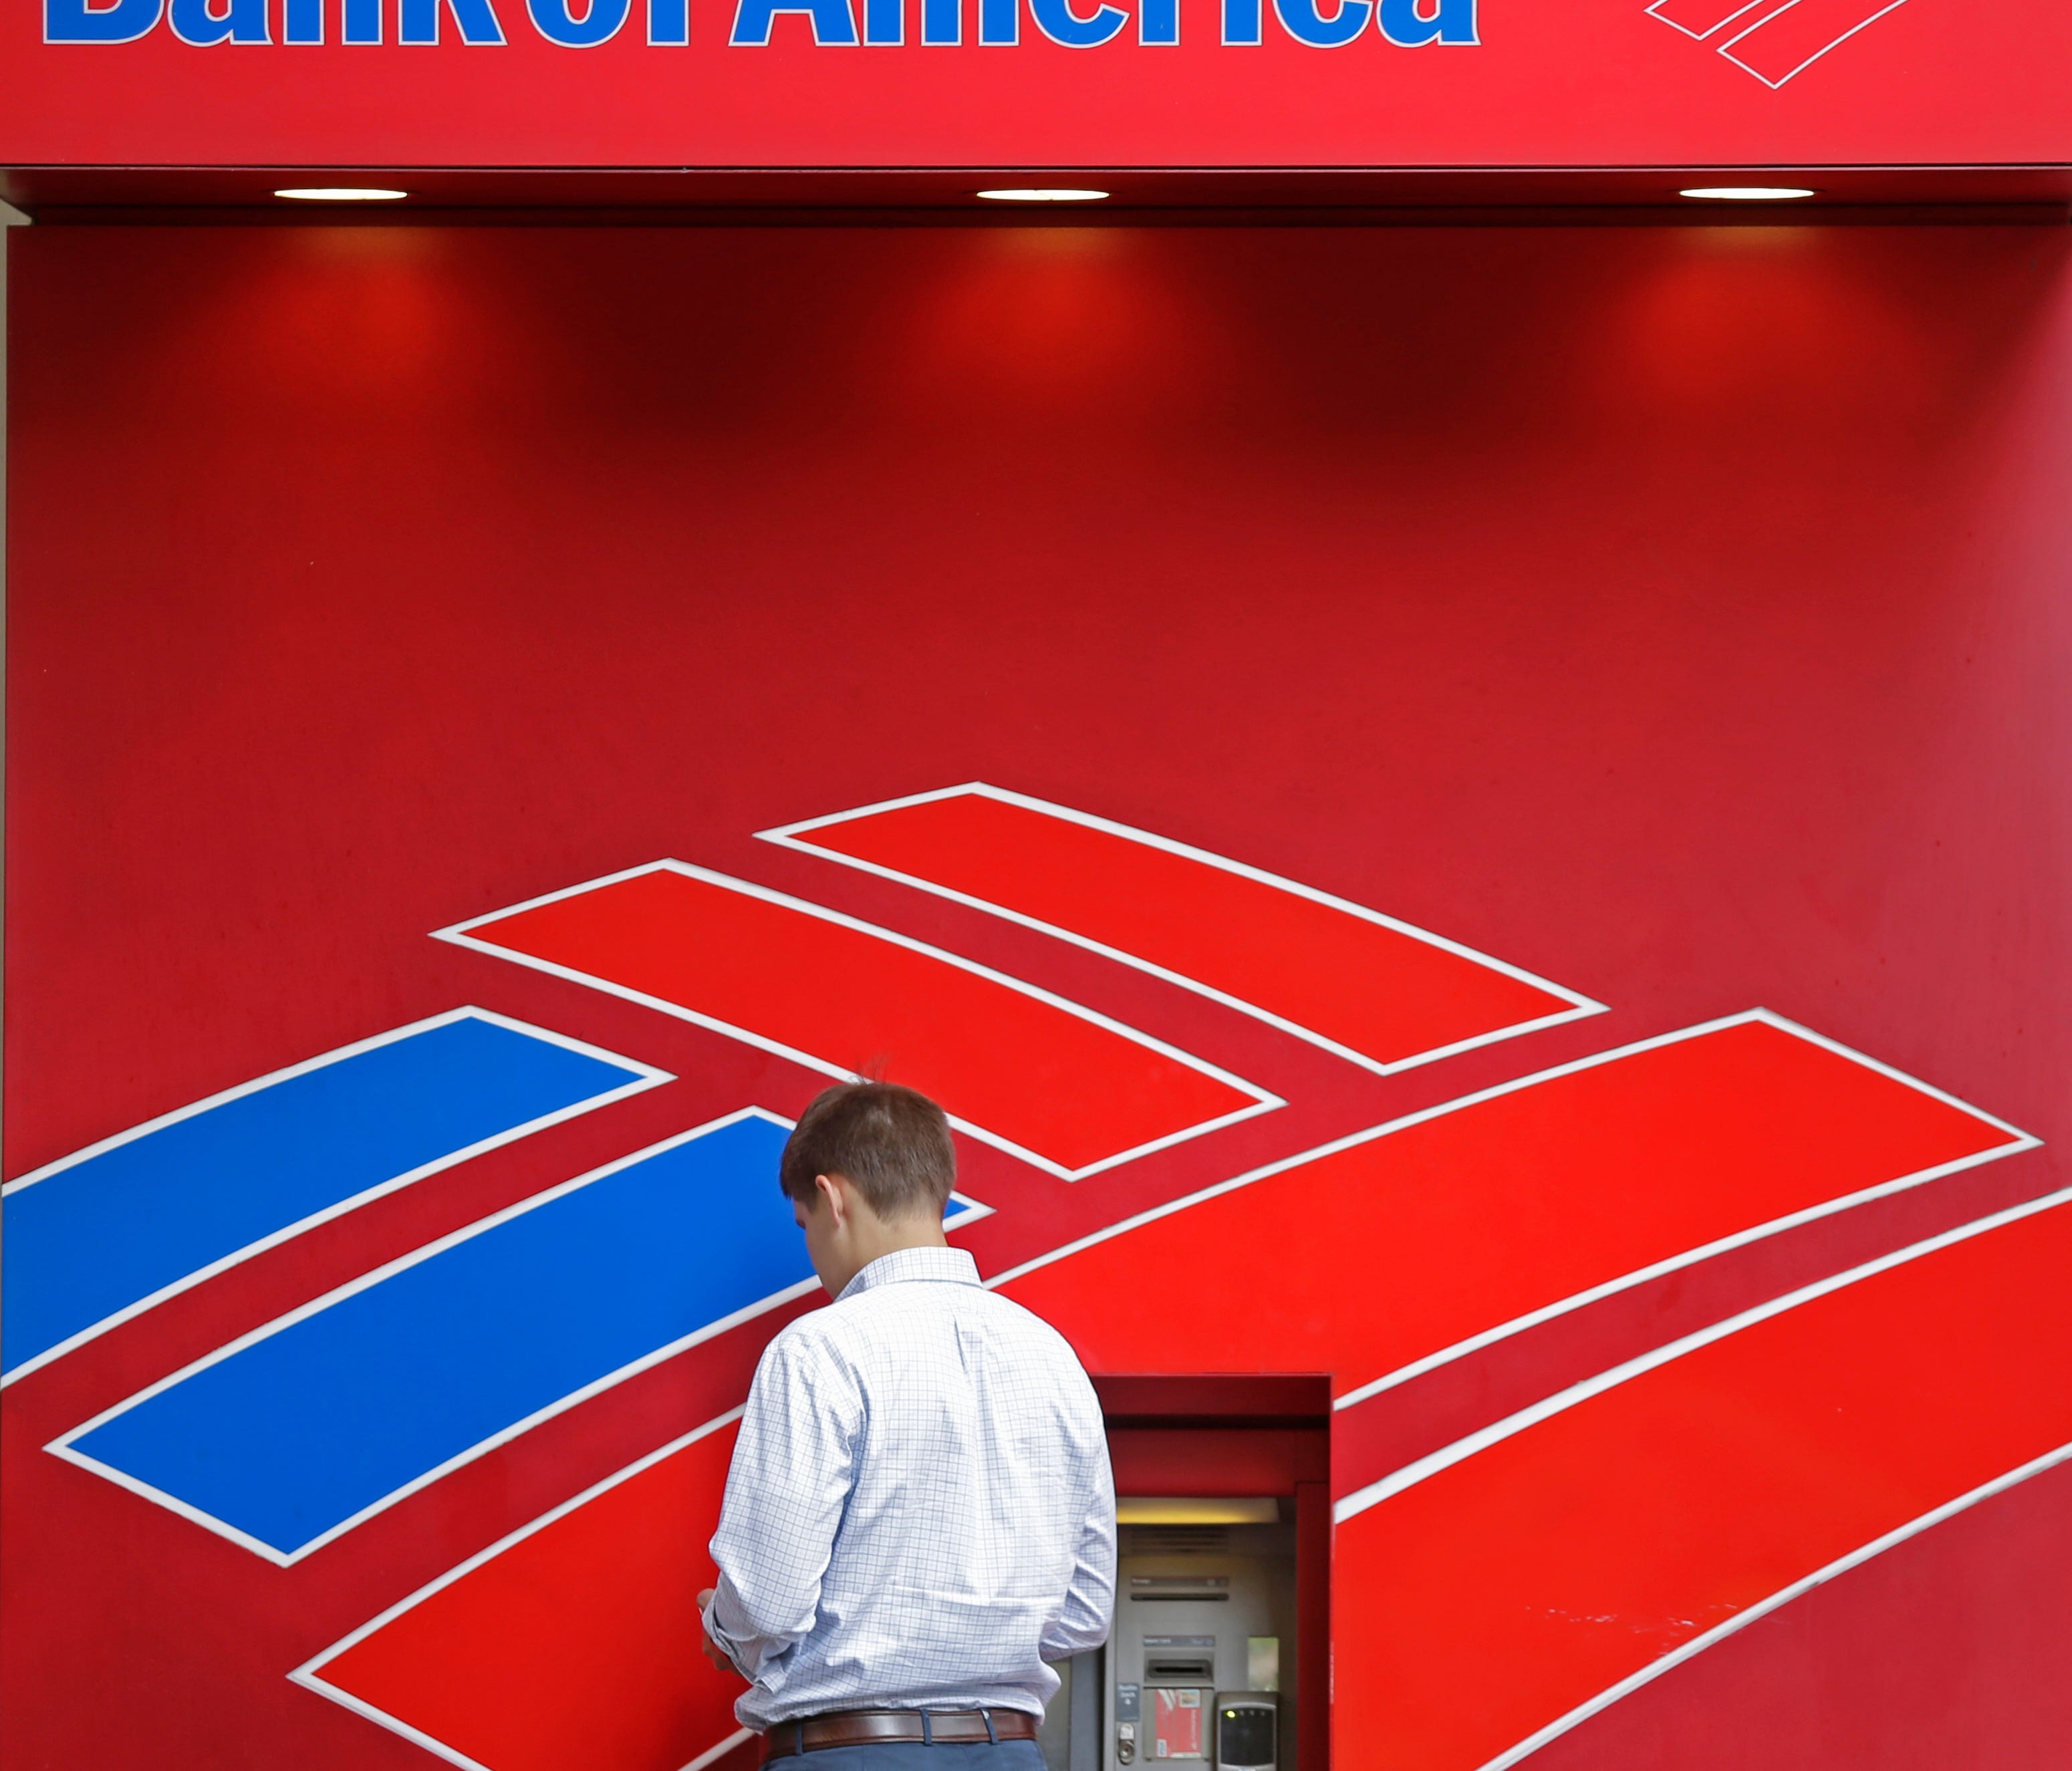 A customer uses a Bank of America ATM near the company's headquarters in Charlotte, N.C., Tuesday, July 7, 2015.